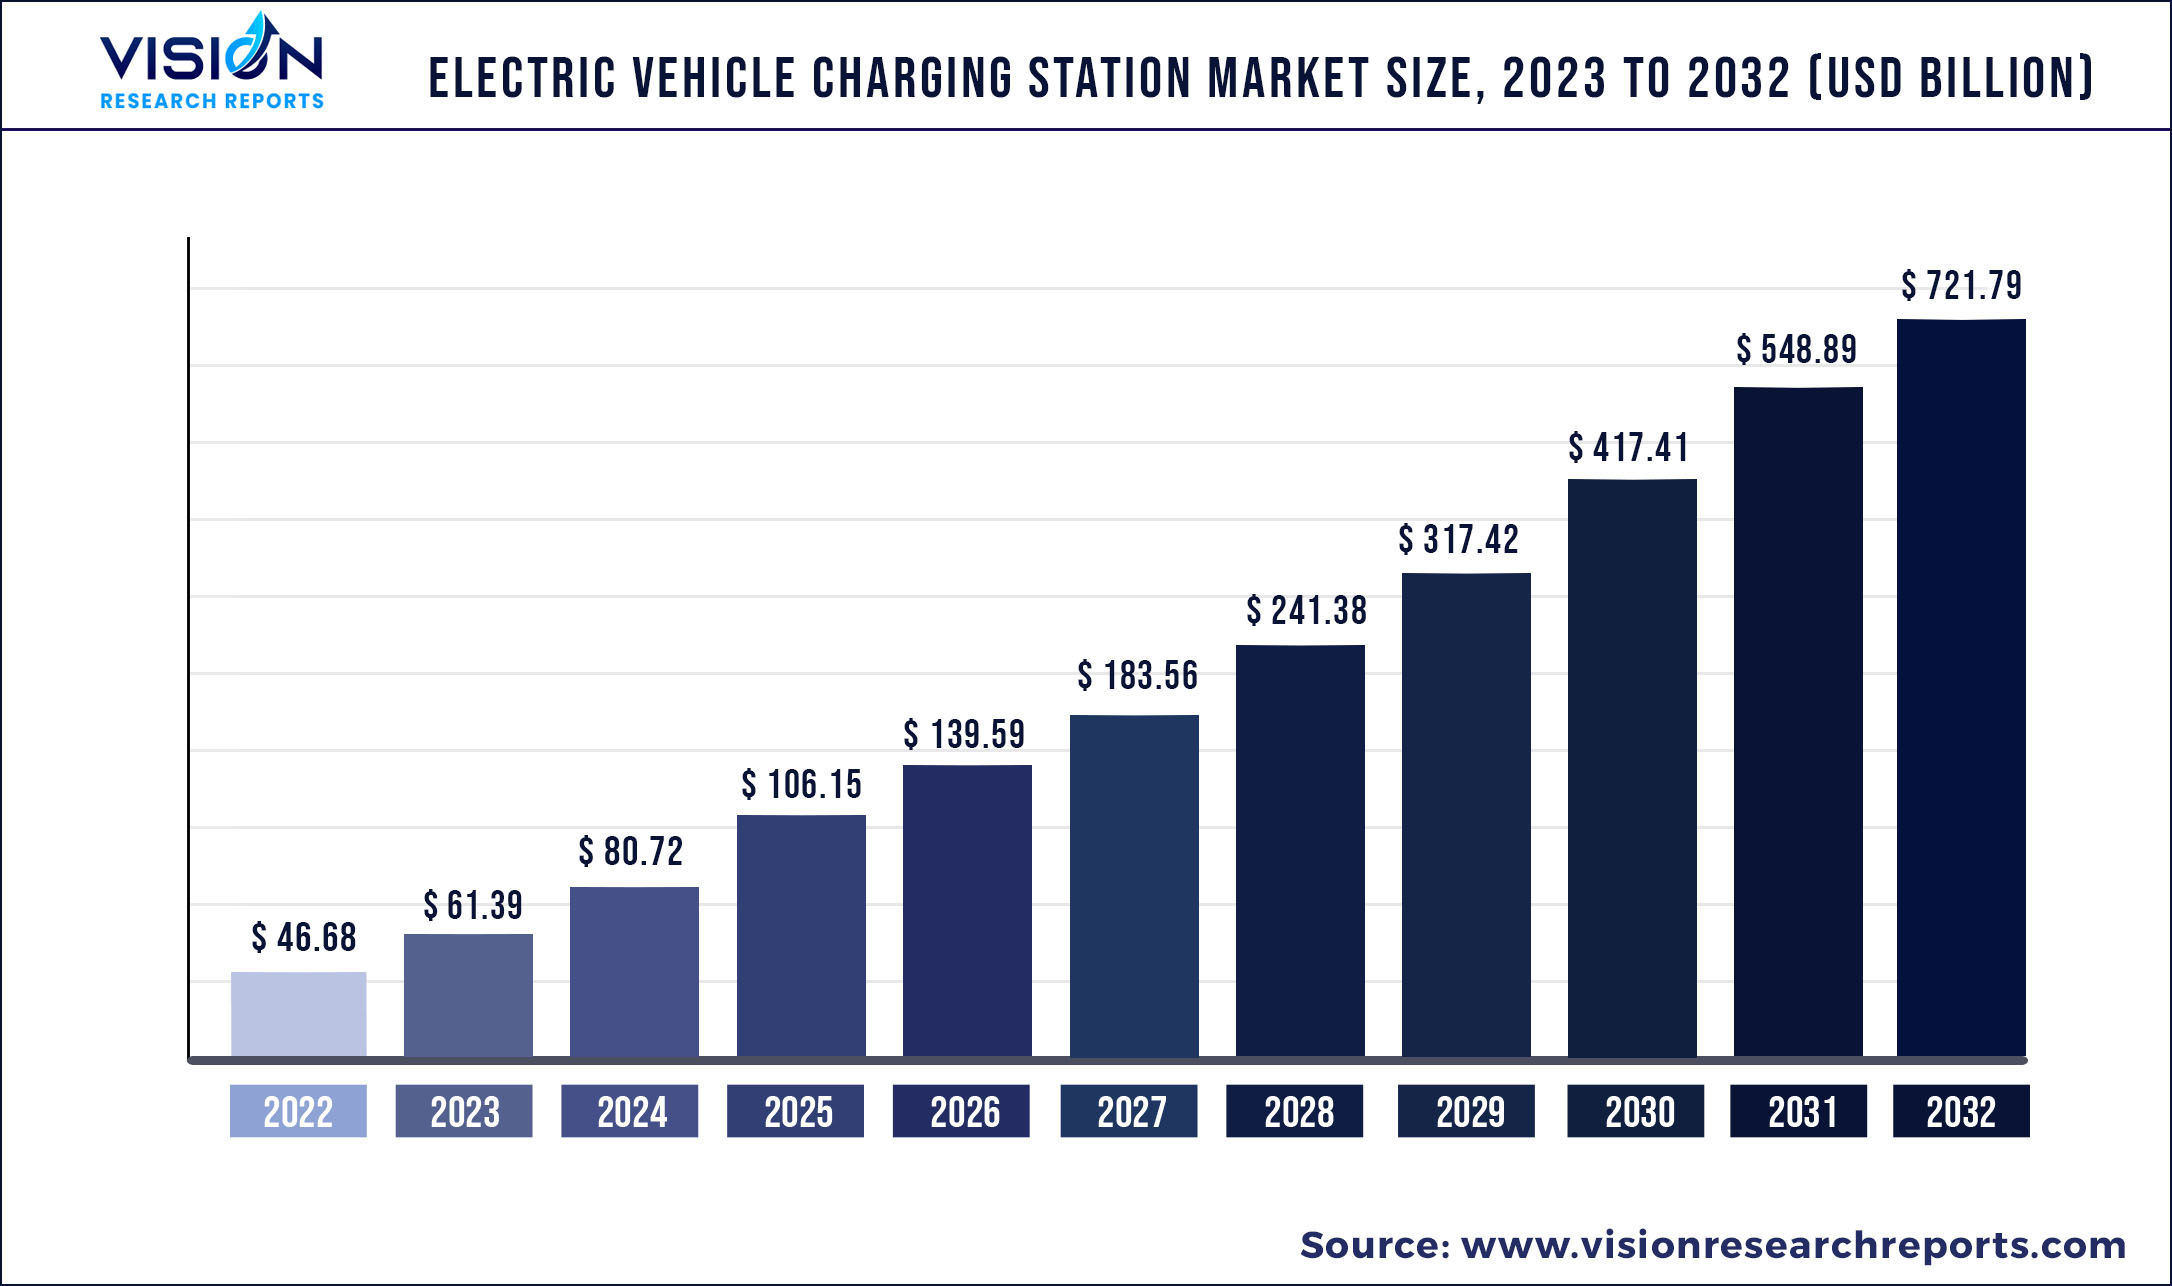 Electric Vehicle Charging Station Market Size 2023 to 2032